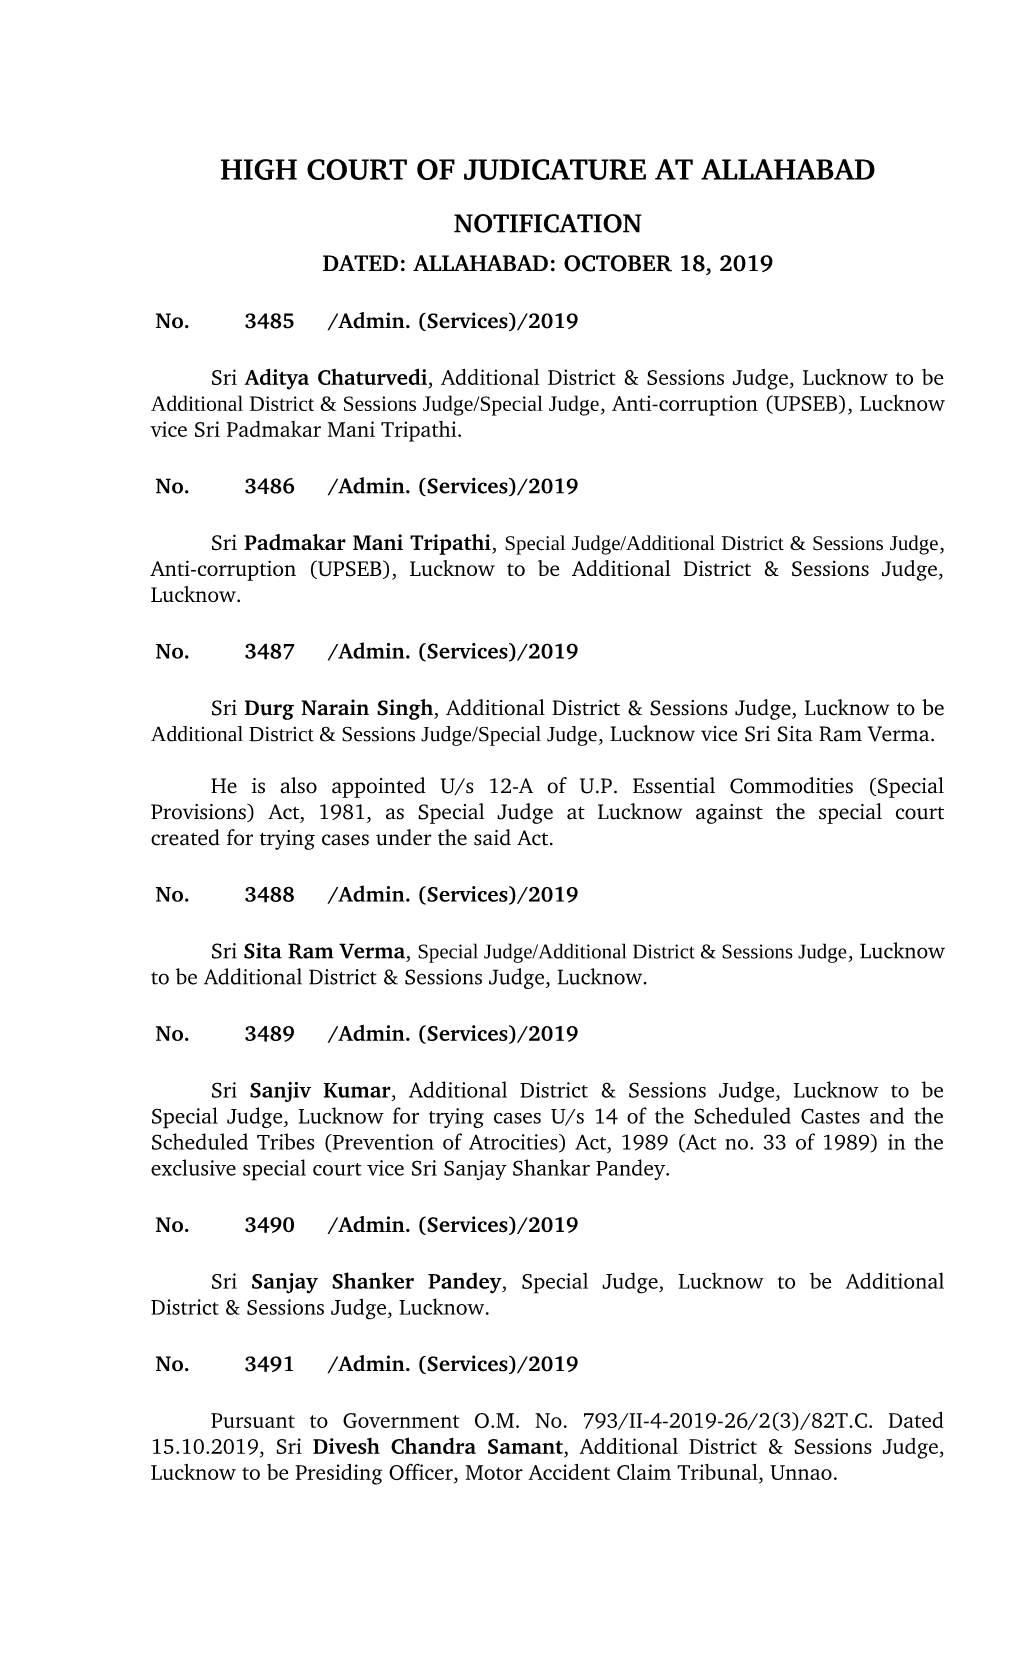 High Court of Judicature at Allahabad Notification Dated: Allahabad: October 18, 2019